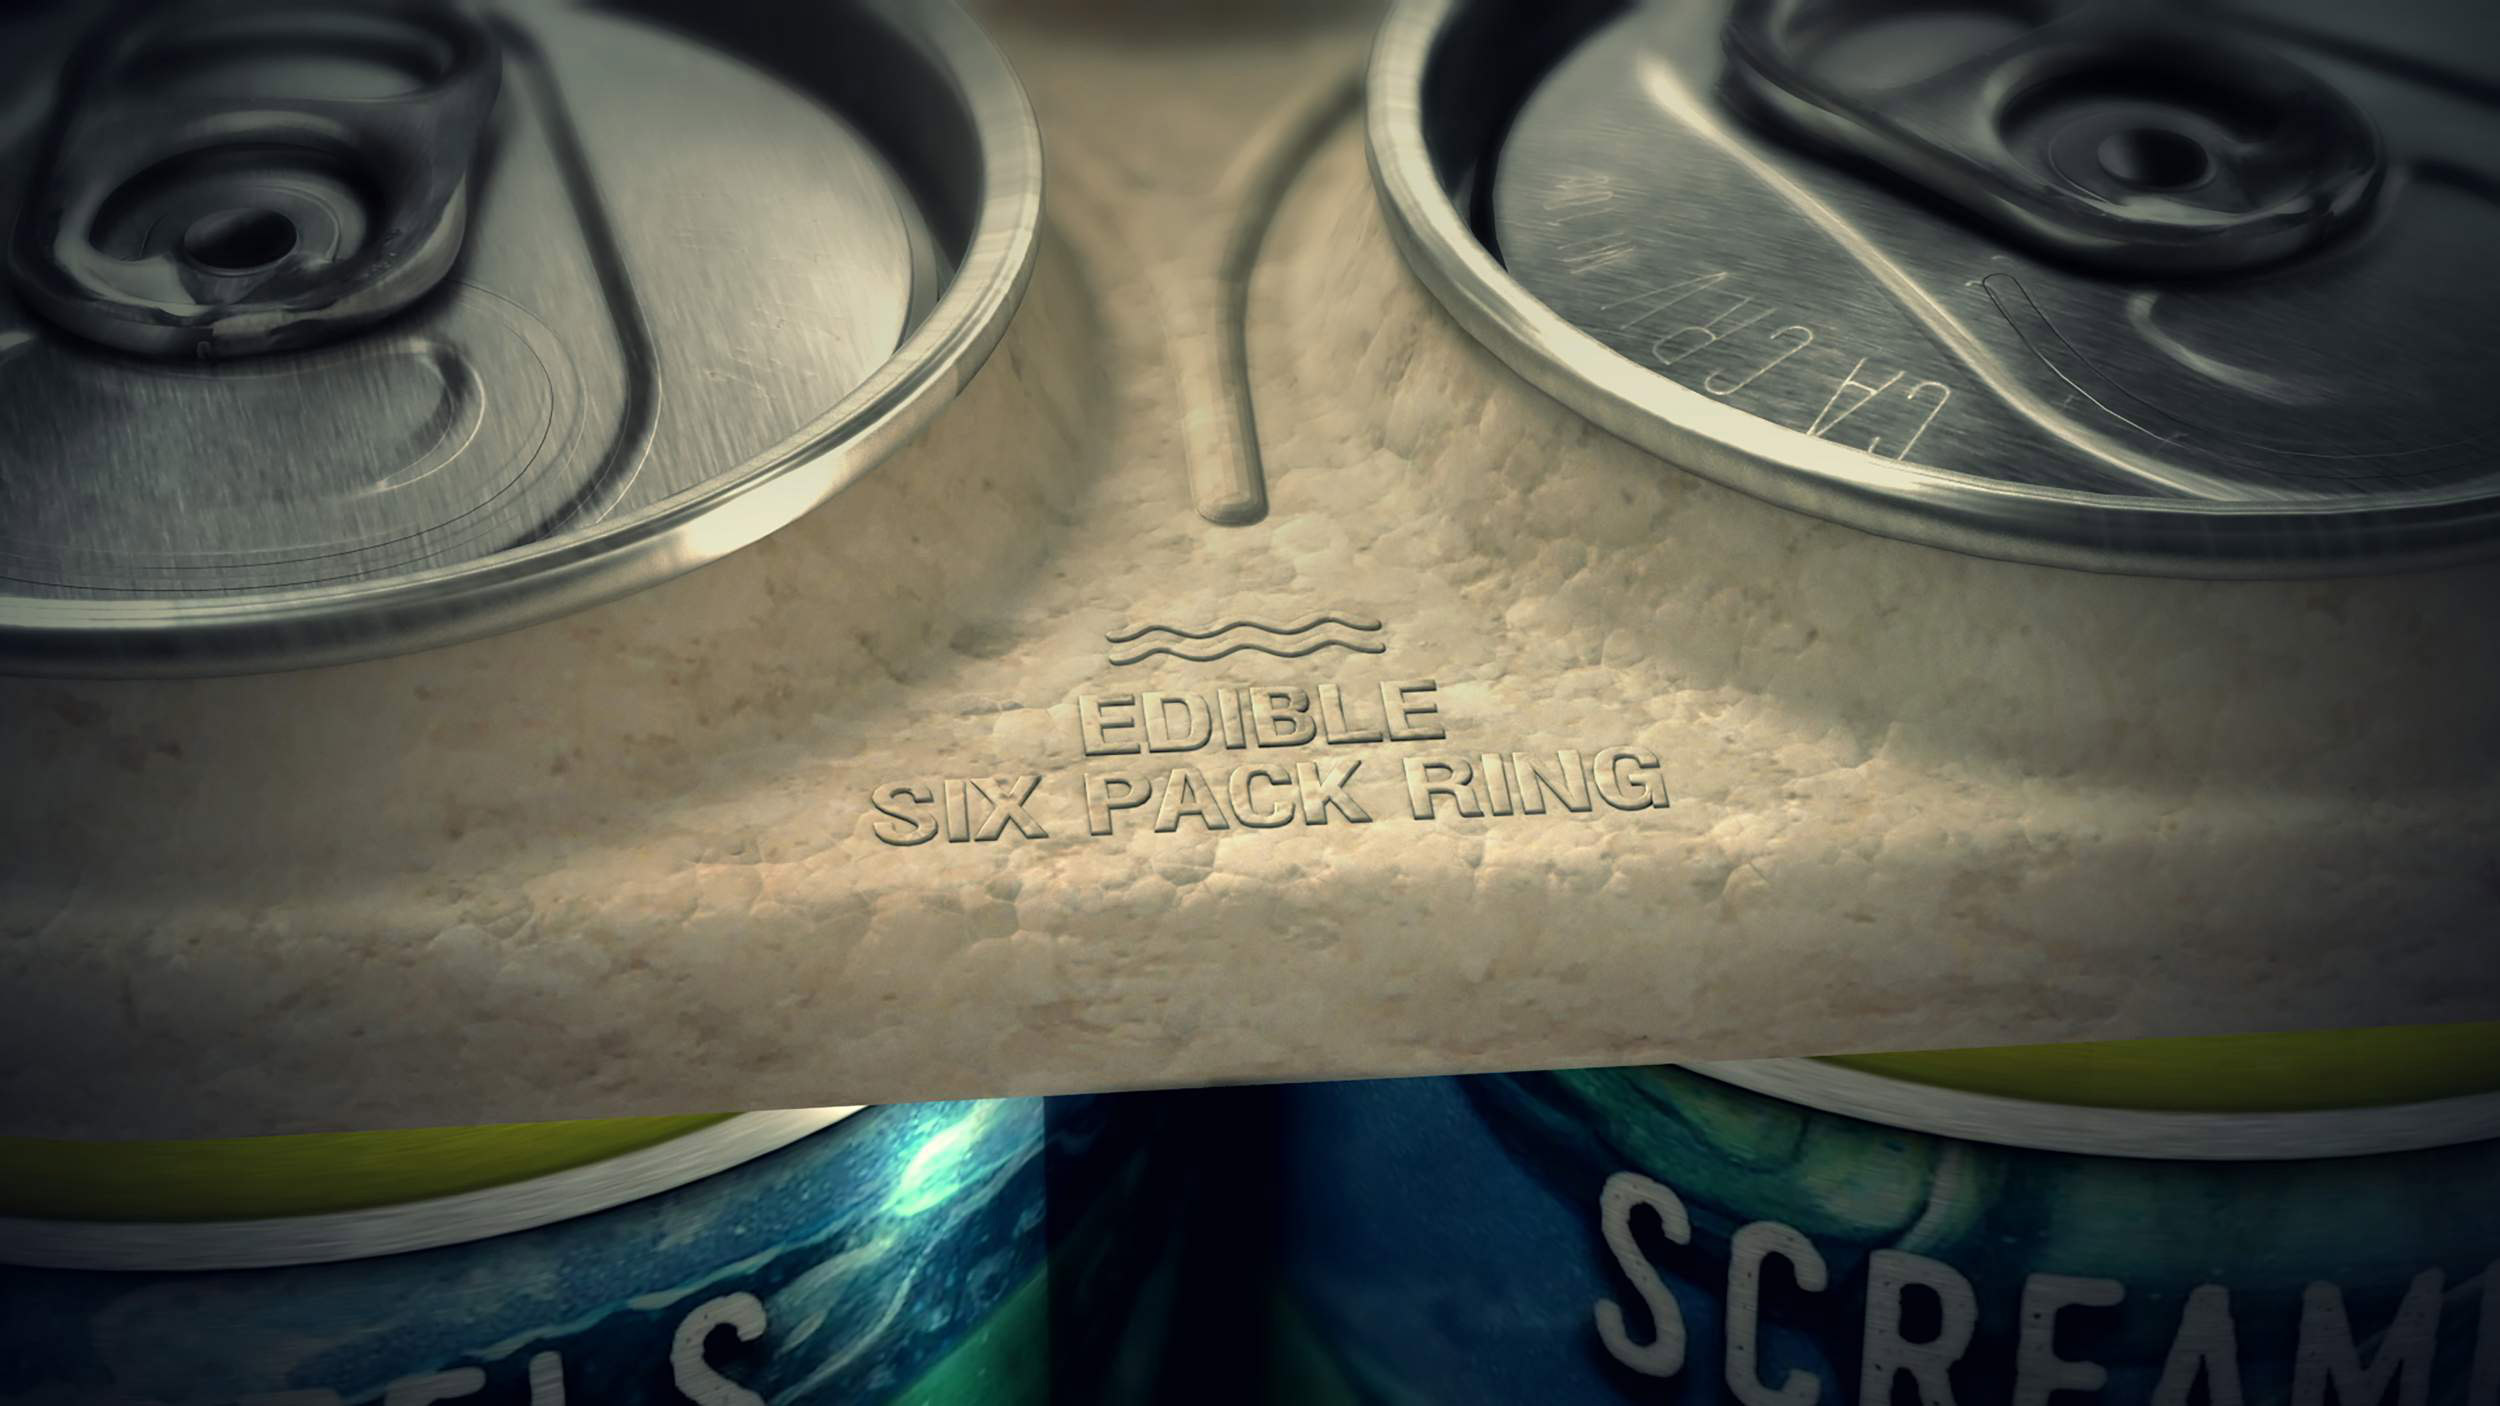 One brewery’s edible six-pack rings made from biodegradable brewing byproducts are so safe they’re actually nutritious to marine life!